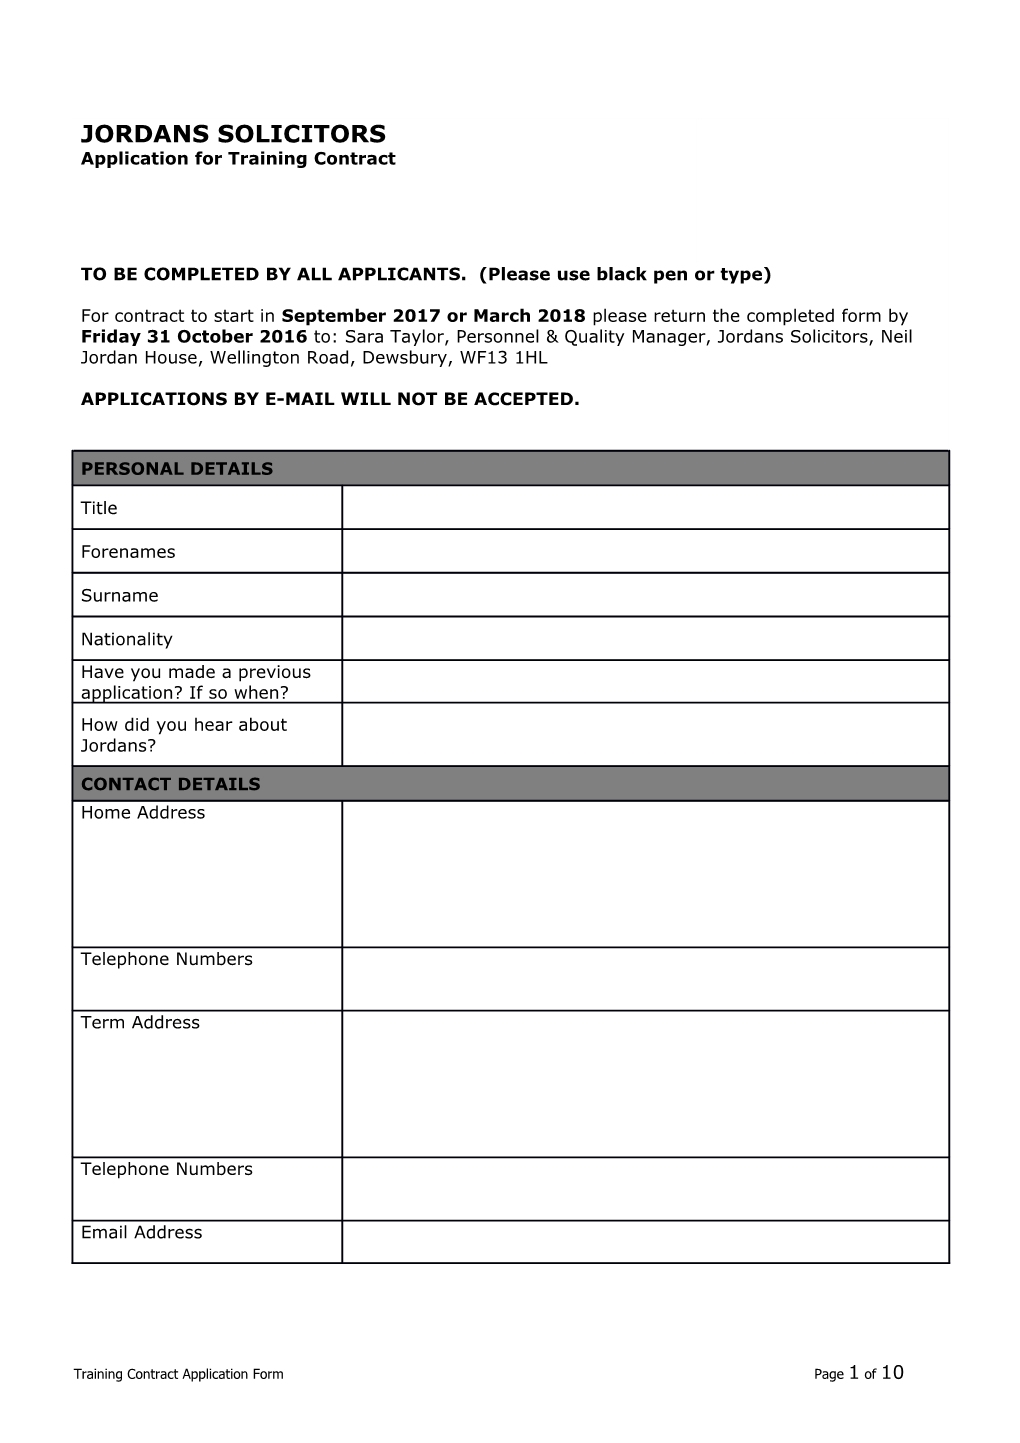 Application for Training Contract